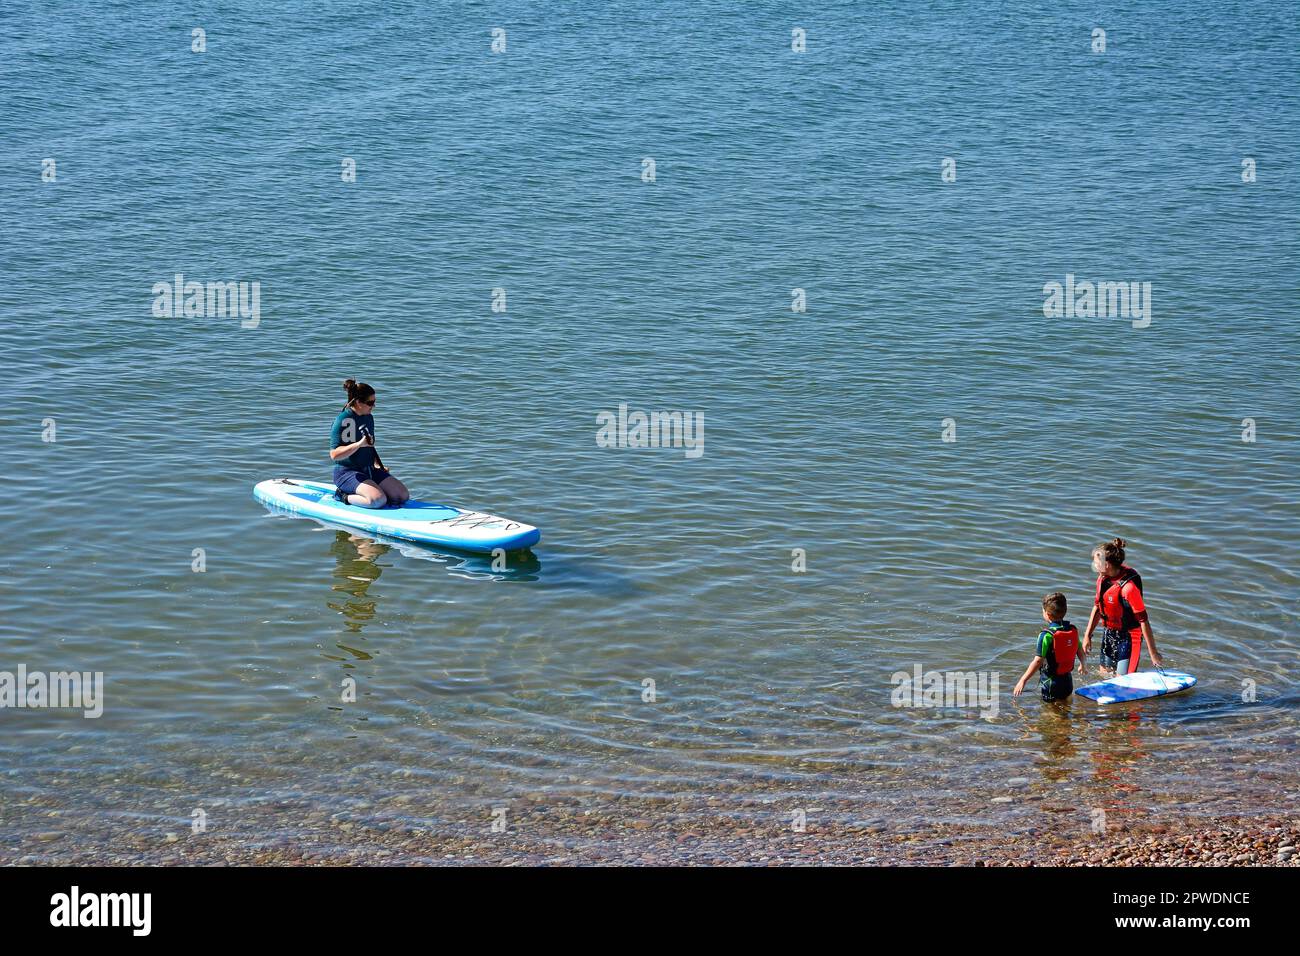 Holidaymakers paddleboarding in the sea, Sidmouth, Devon, UK, Europe. Stock Photo